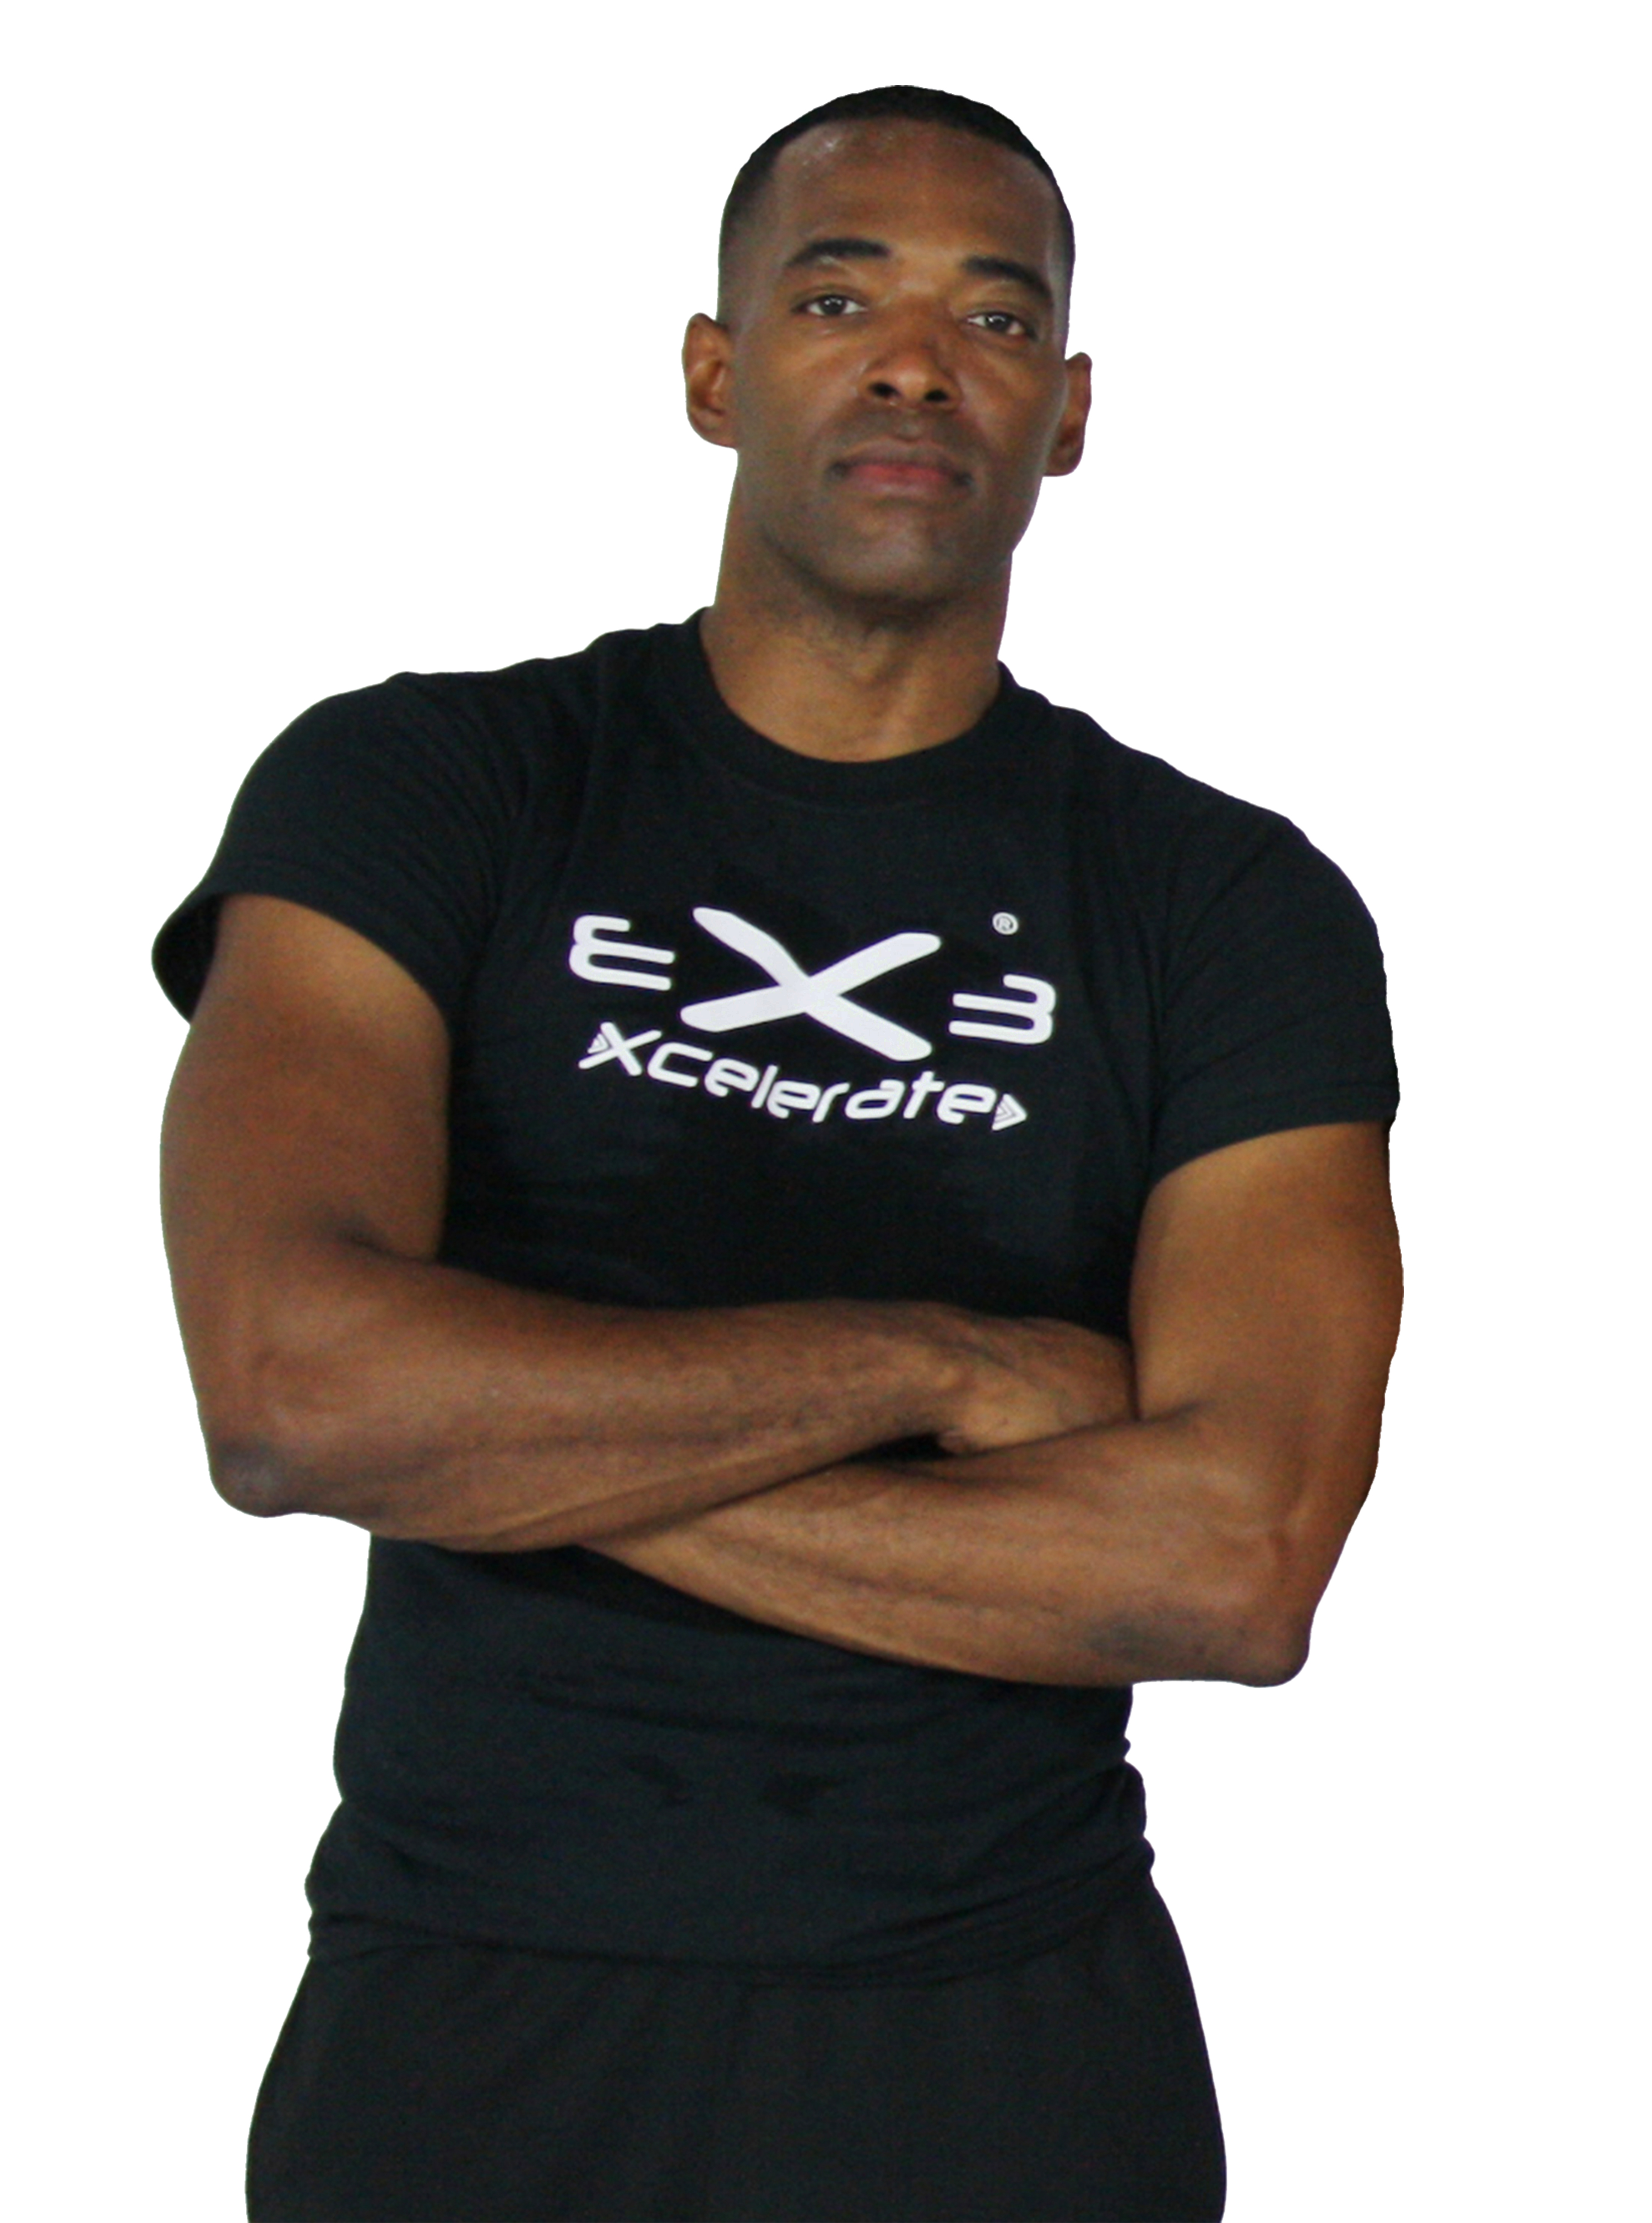 Felton Young; Member of Neoteric Body Fitness, LLC. The Fitness Training for 3X3 Xcelerate Level Select Workout. Only at Walmart.com